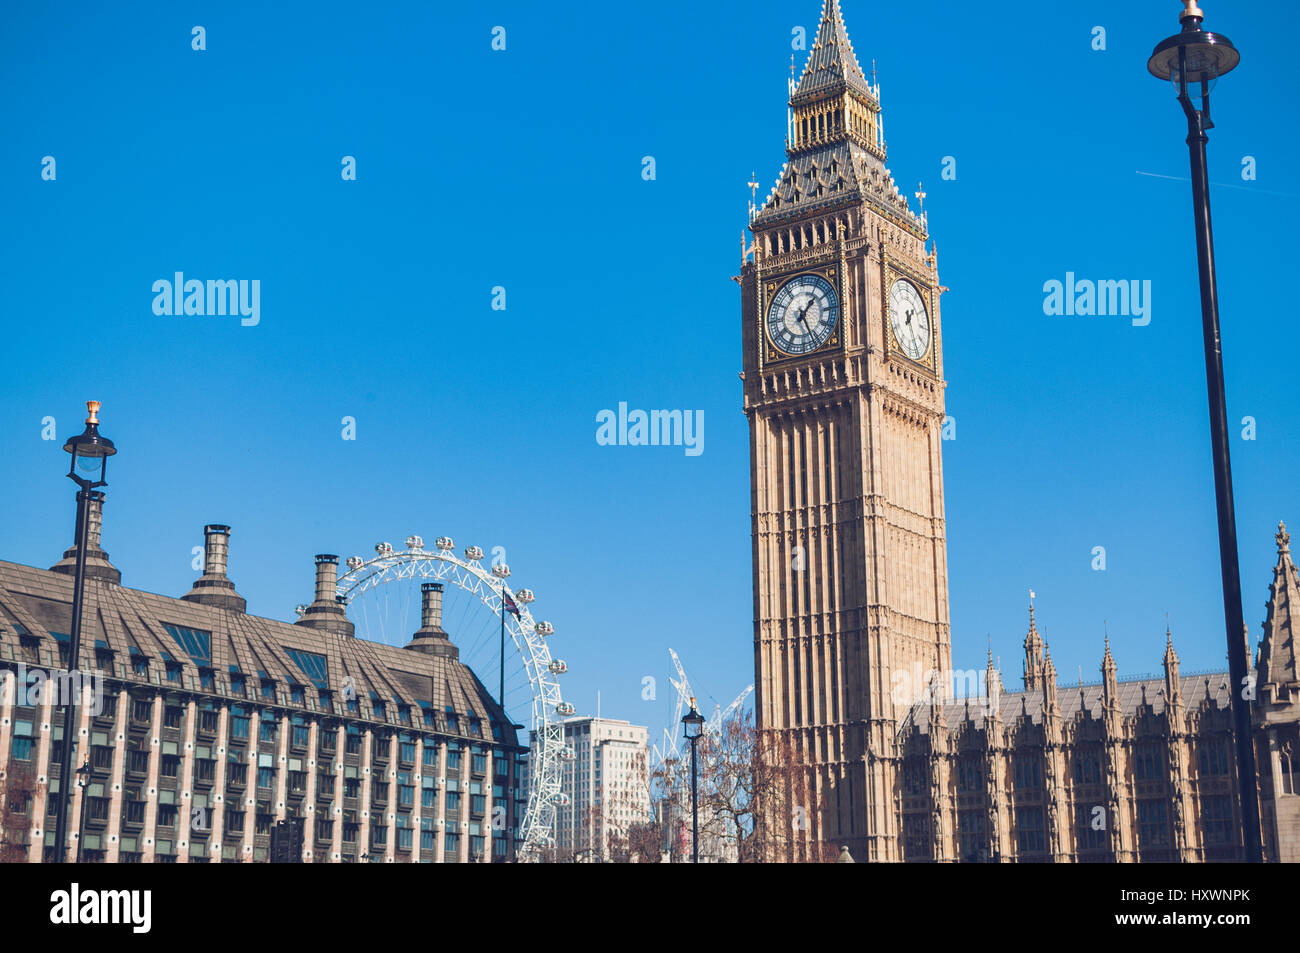 Street View of Big Ben, houses of Parliament and The London Eye on a beautiful sunny blue skies day. London, 2017. Stock Photo